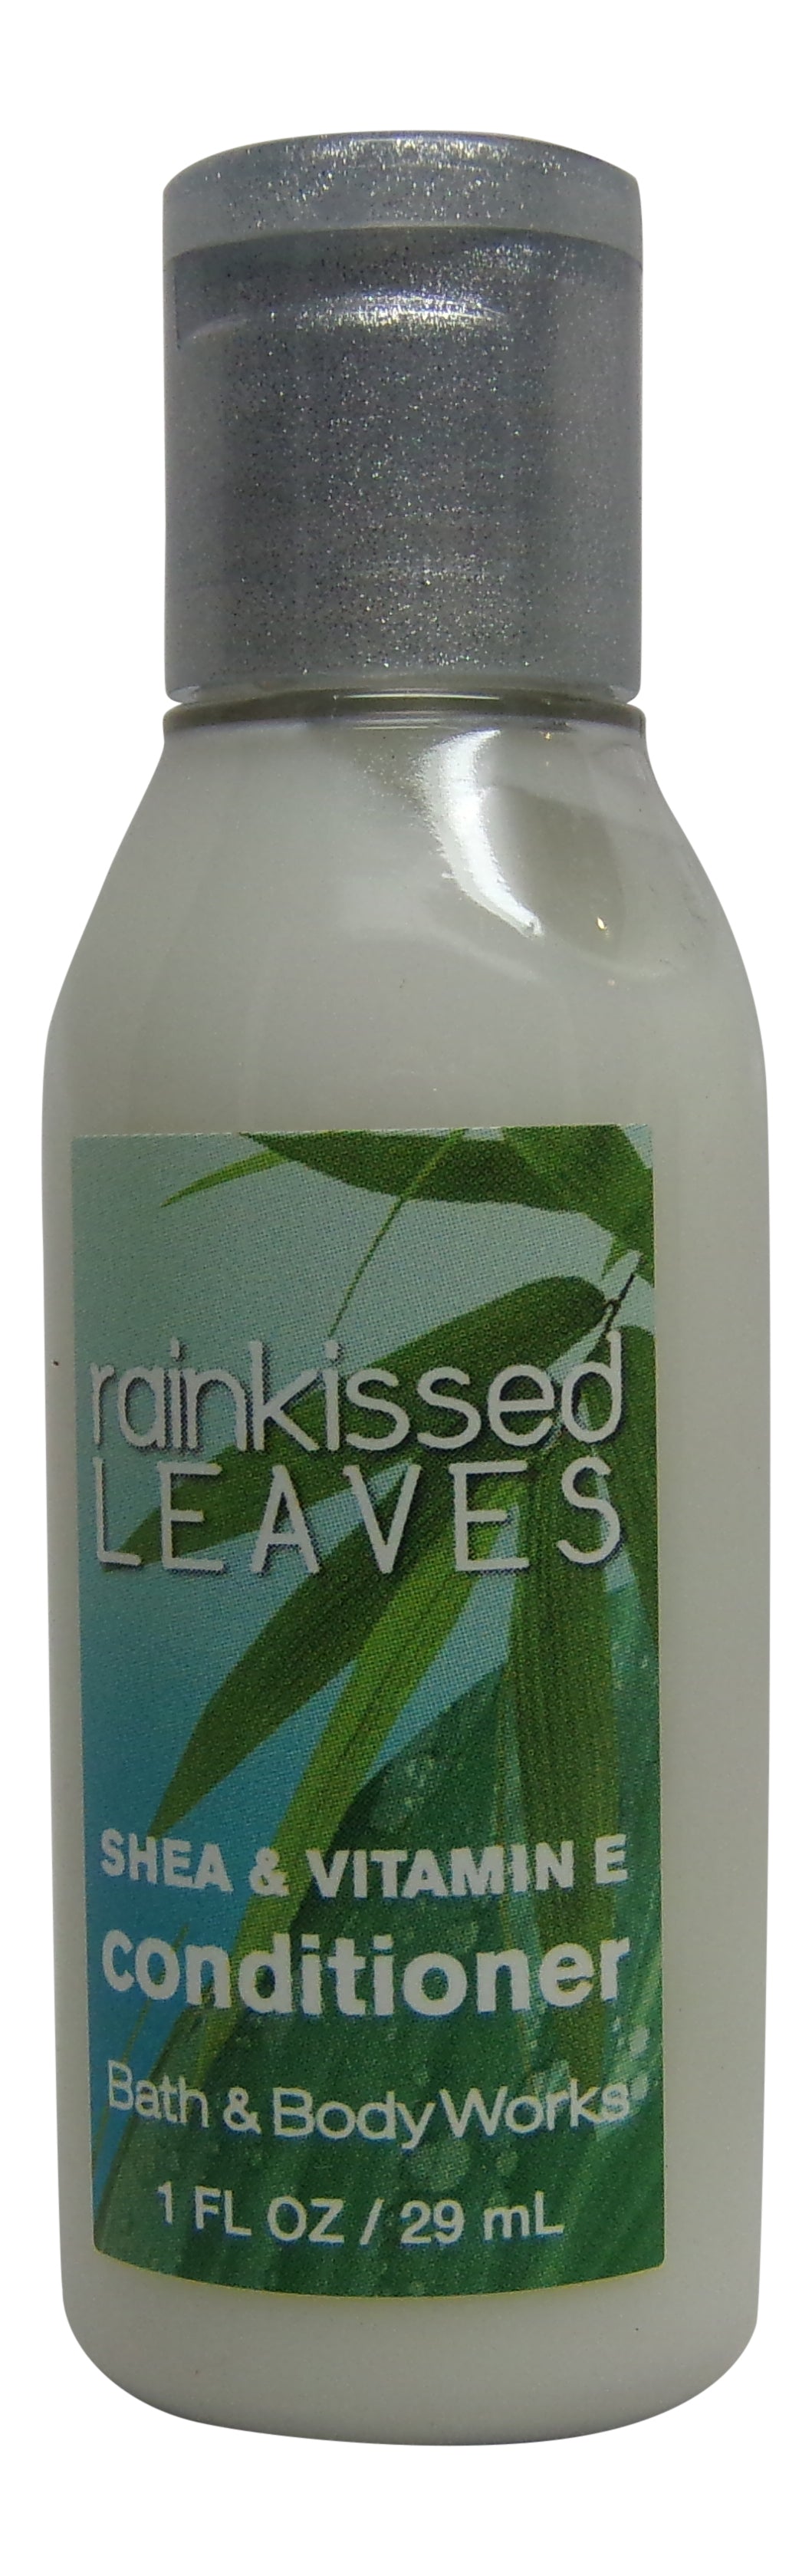 Bath & Body Works Rainkissed Leaves Shampoo & Conditioner lot of 10 Bottles